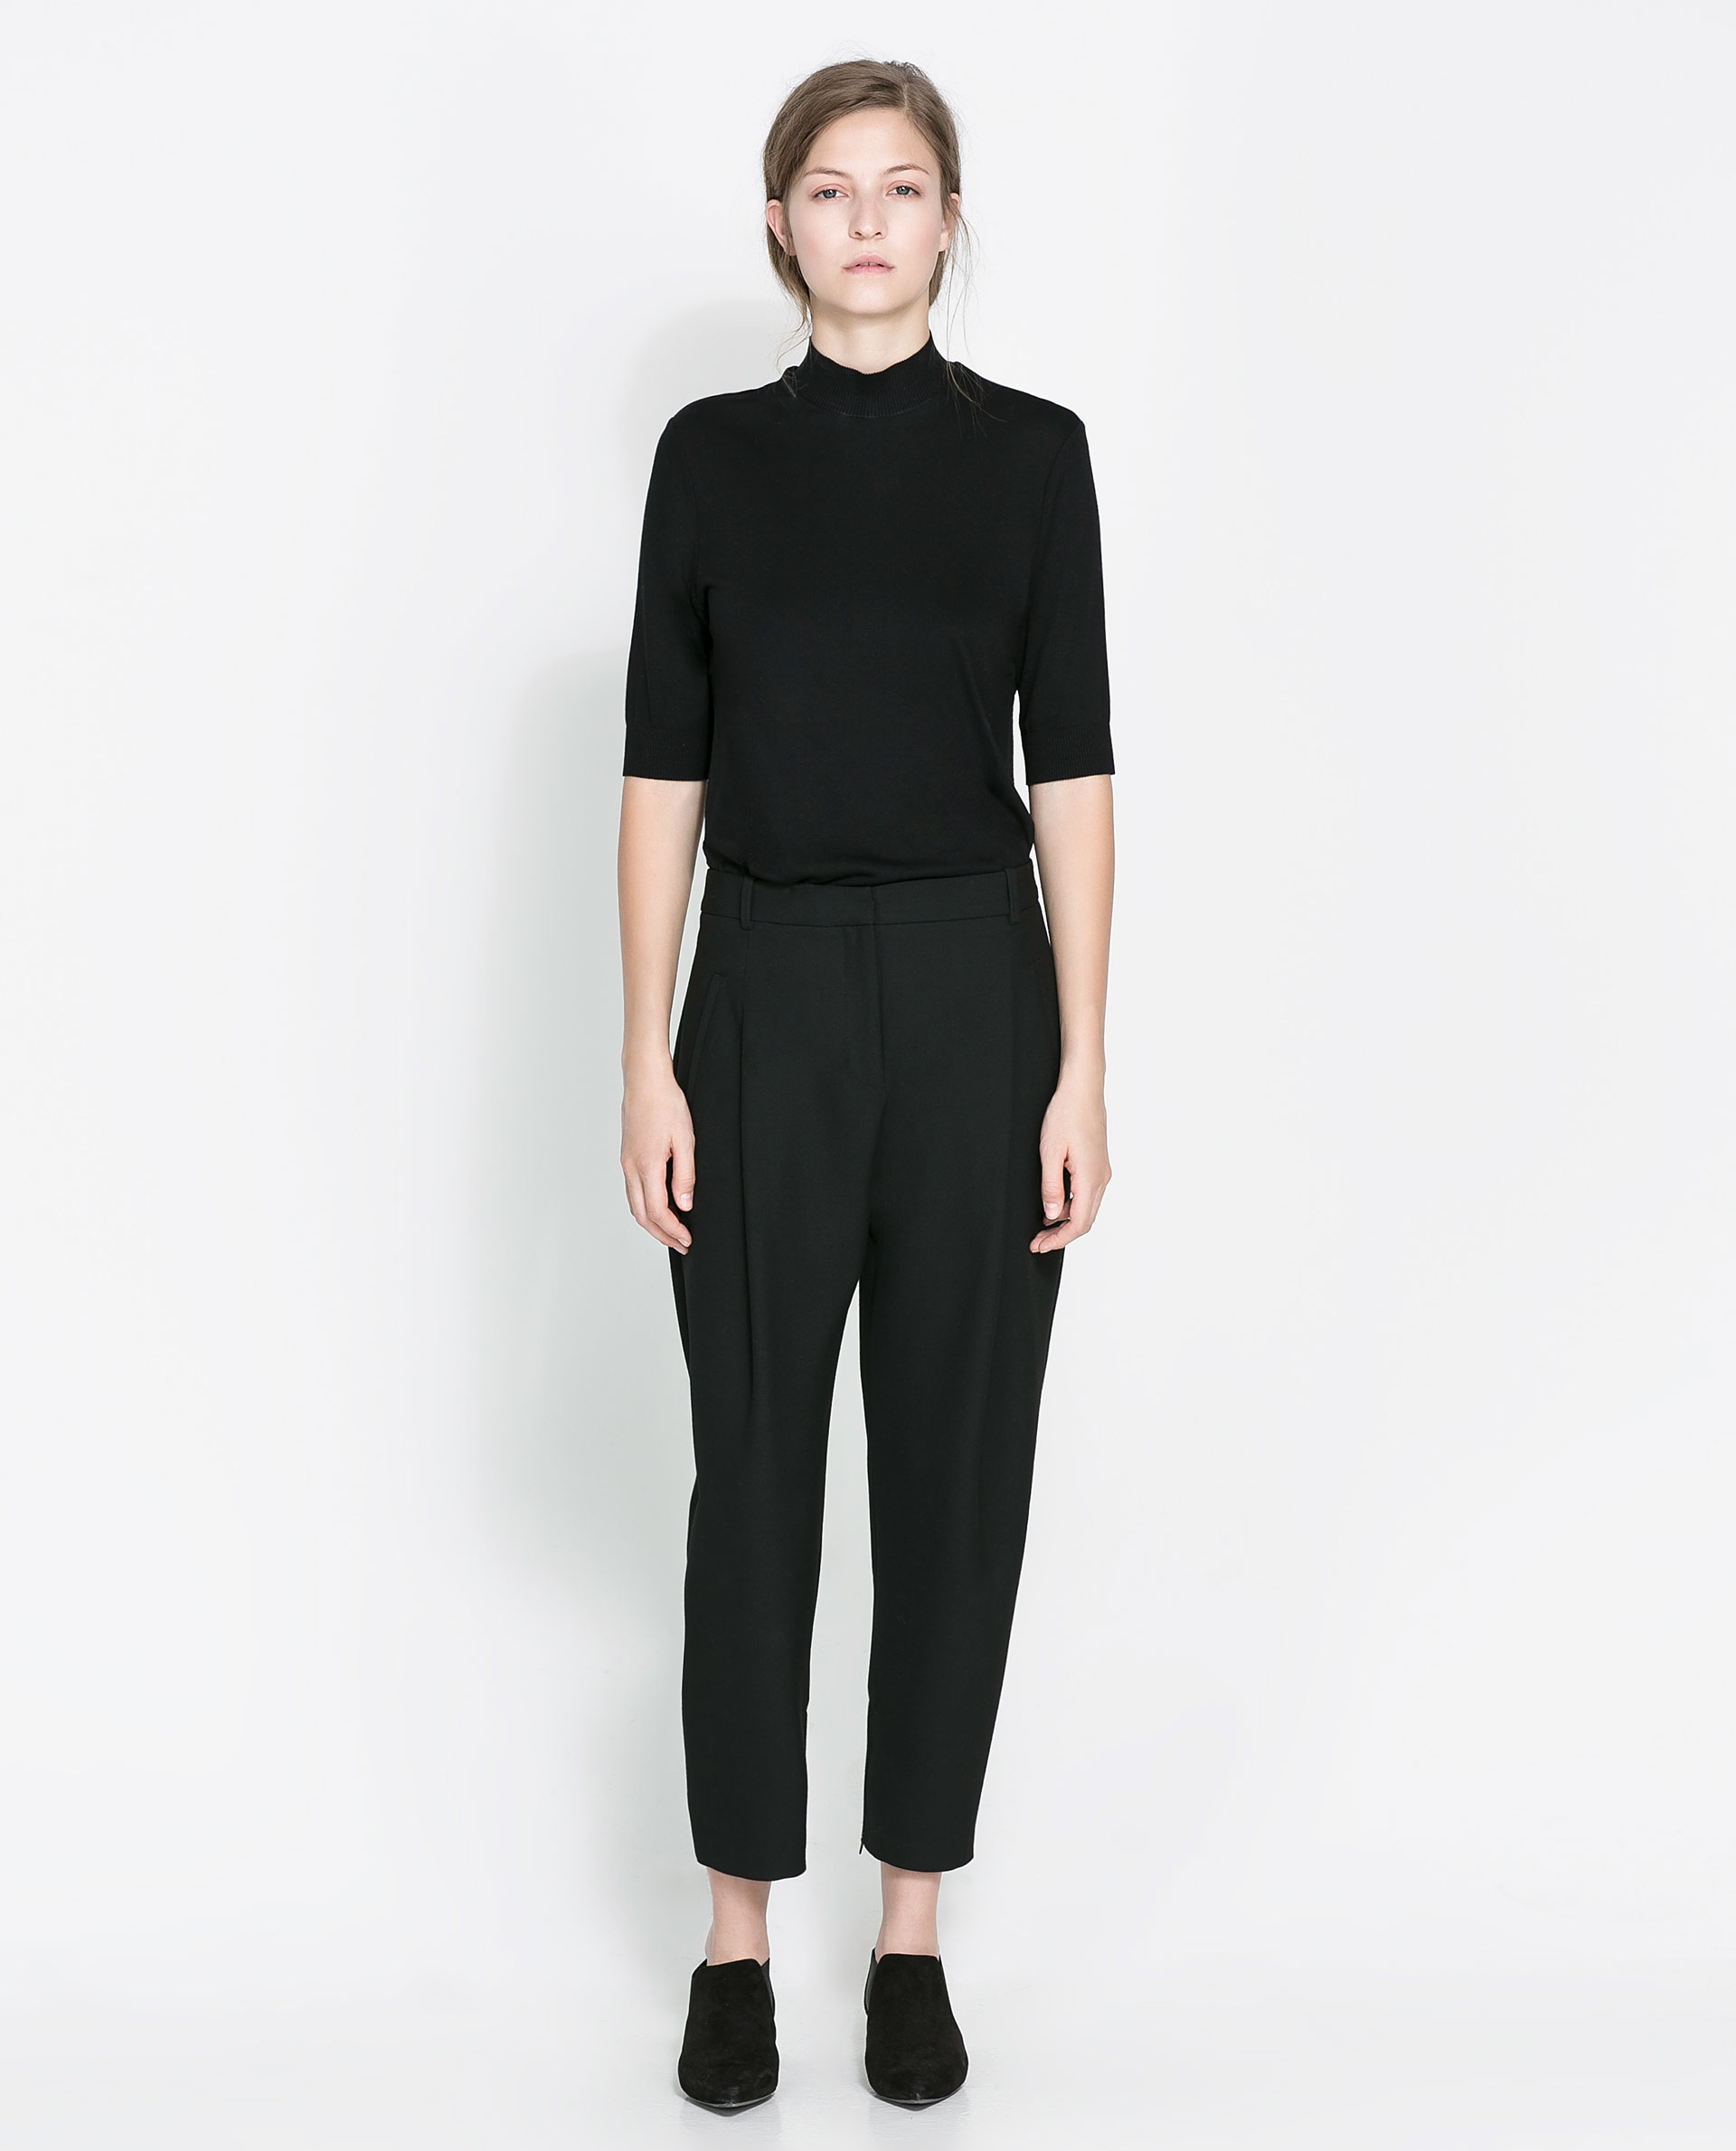 Zara Trousers with Pleat Front in Black | Lyst